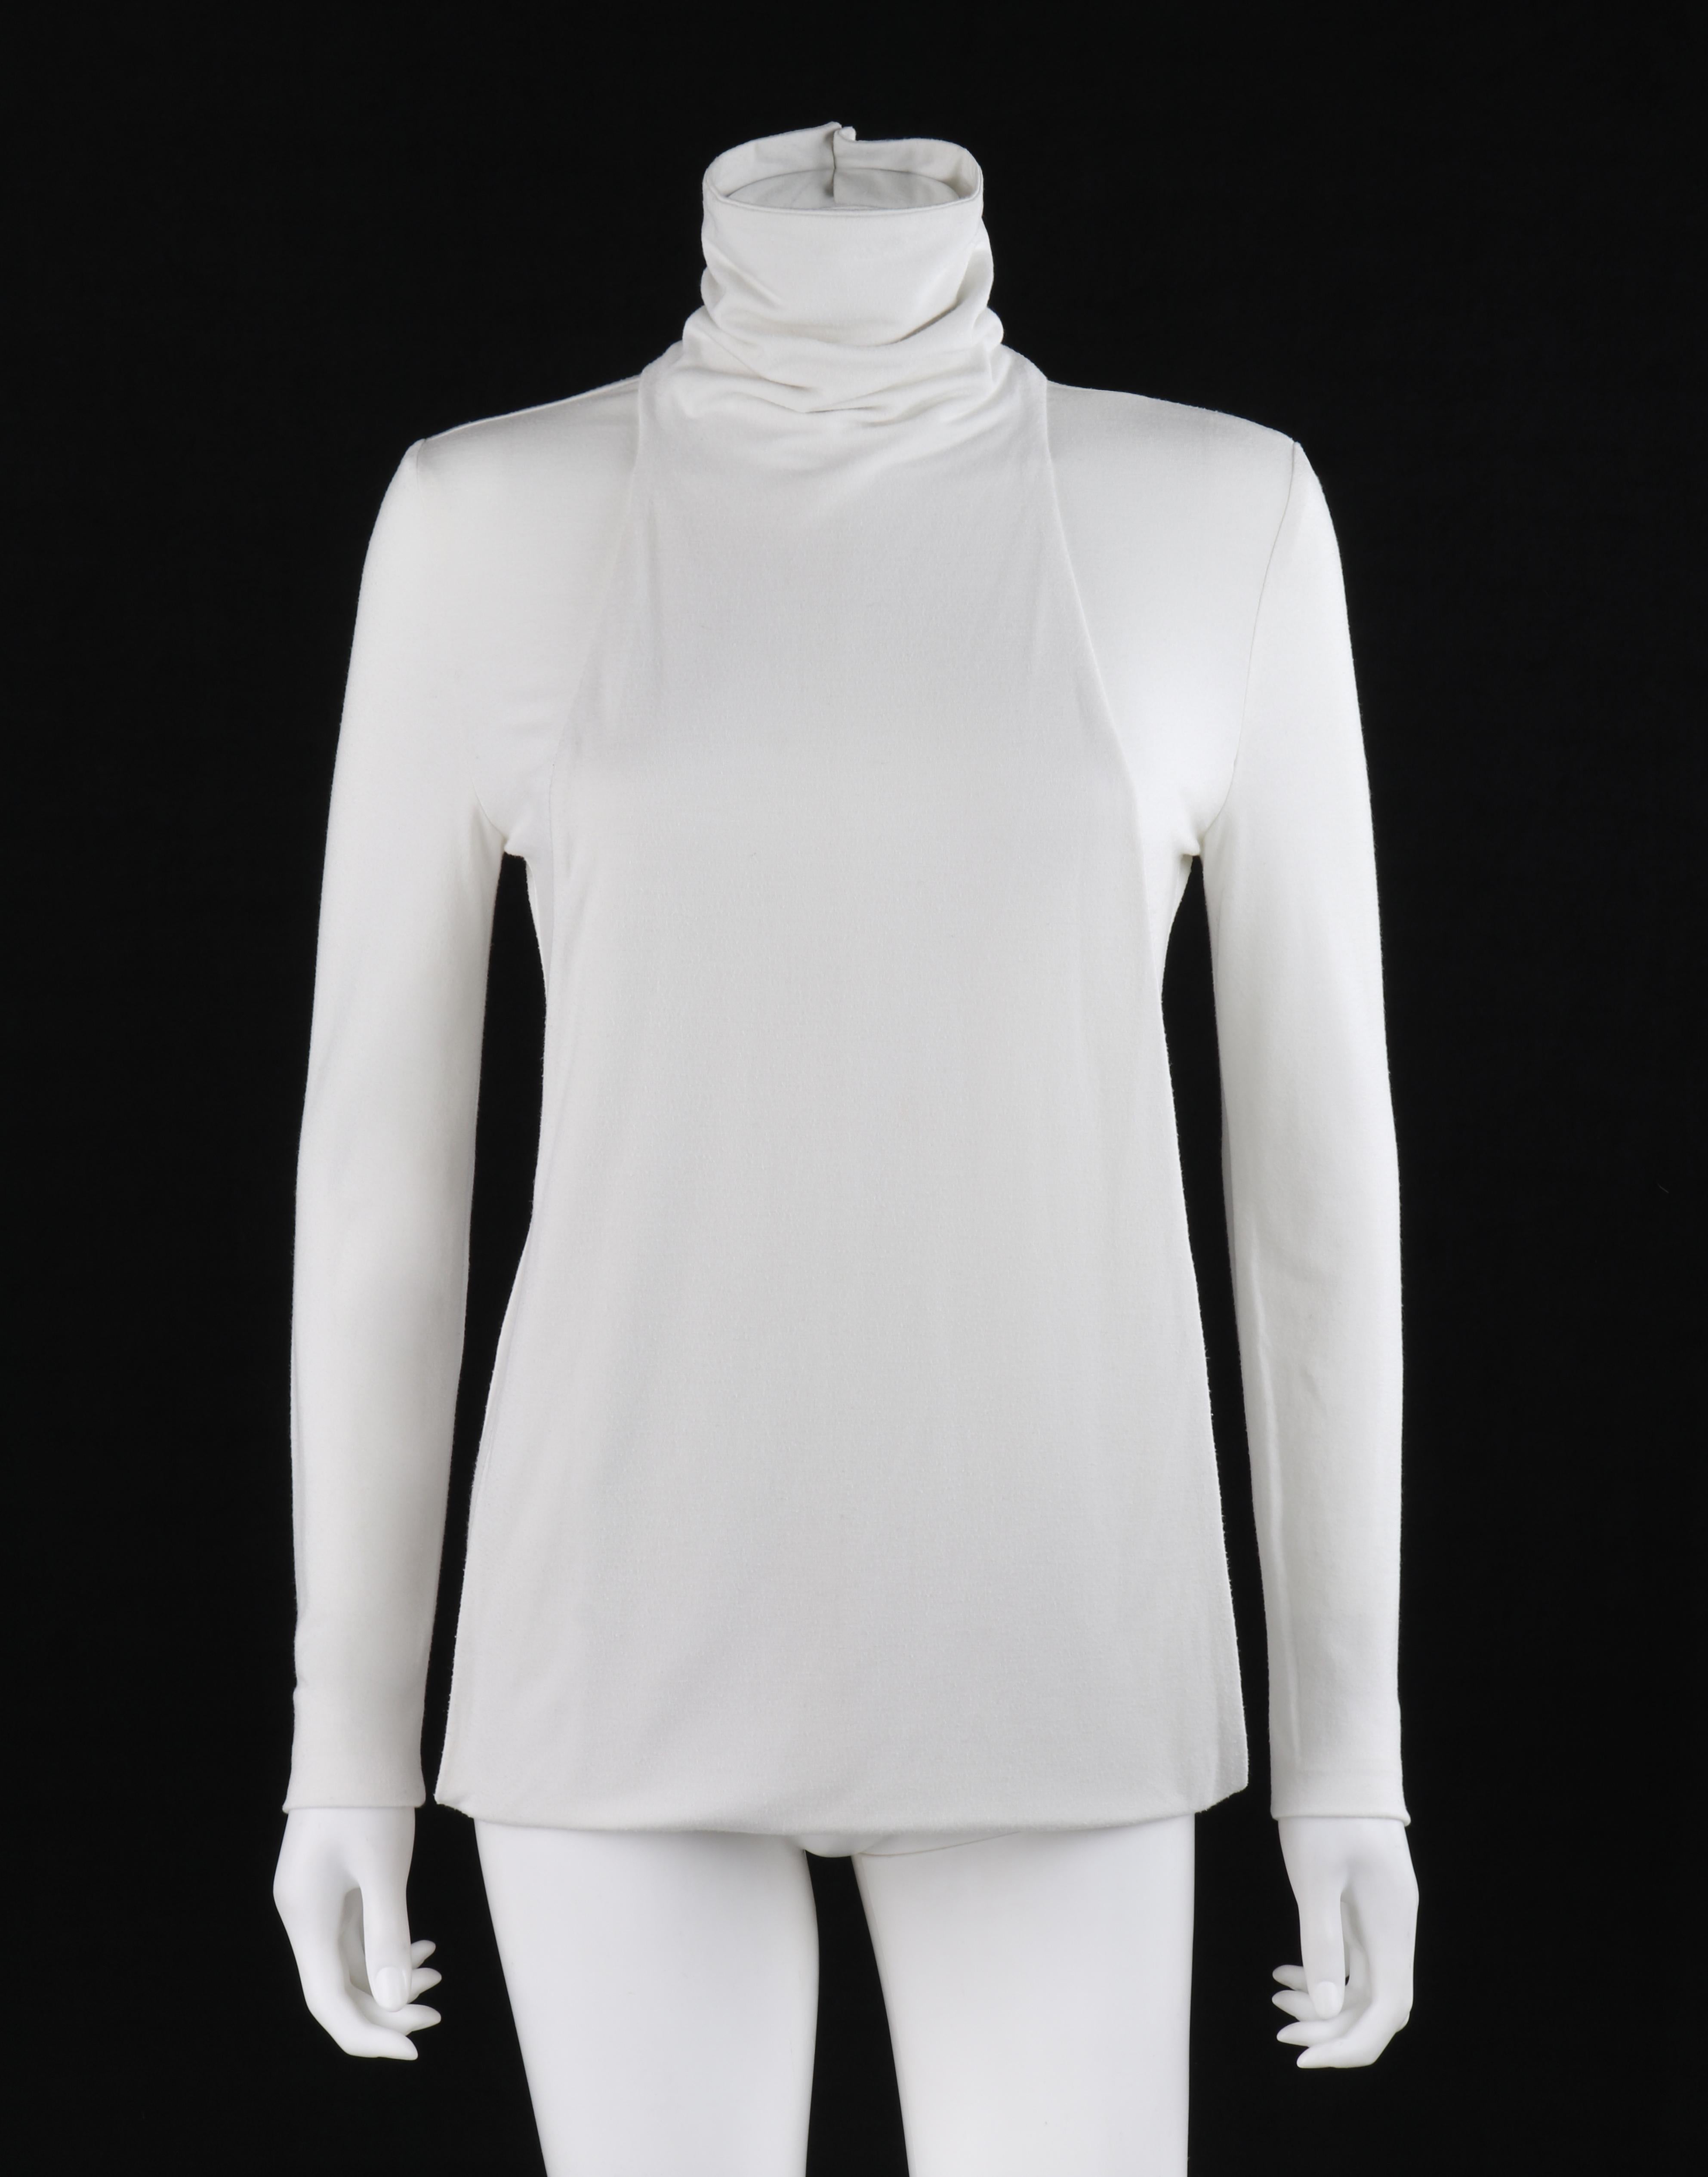 ALEXANDER McQUEEN S/S 2000 “Eye” White Convertible Twisted Front High Neck Top For Sale 1